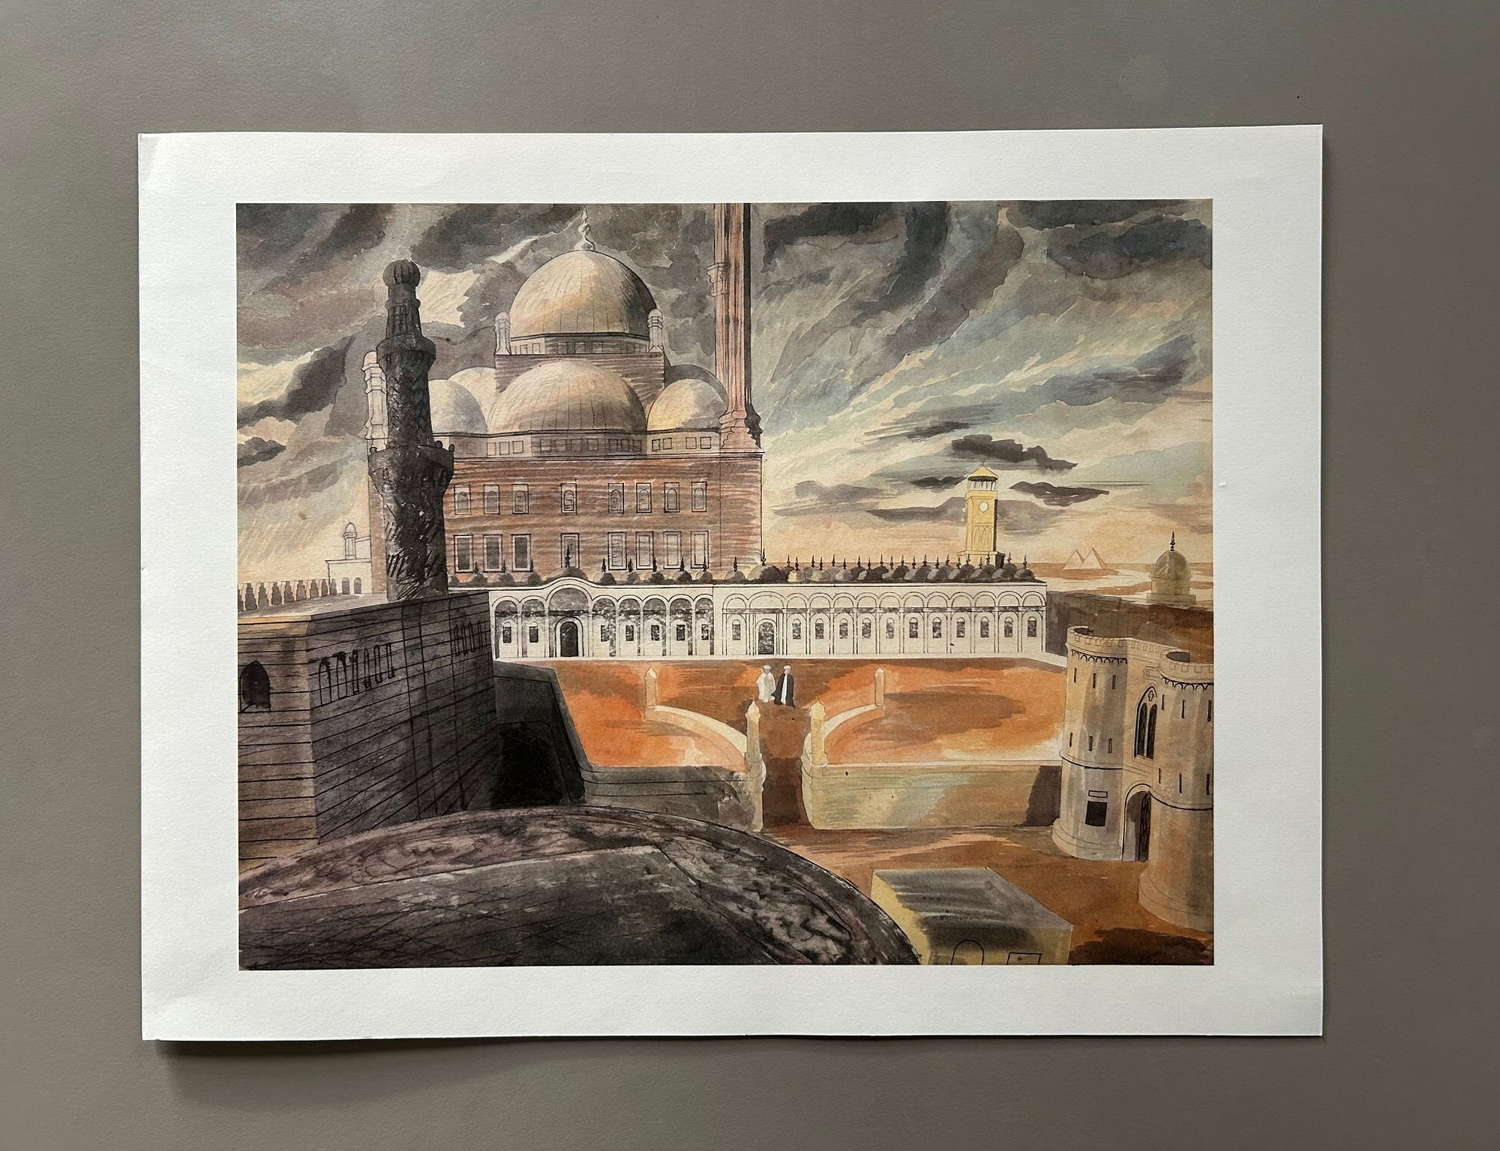 Cairo, The Citadel: Mohammed Ali Mosque, 1986 by Edward Bawden